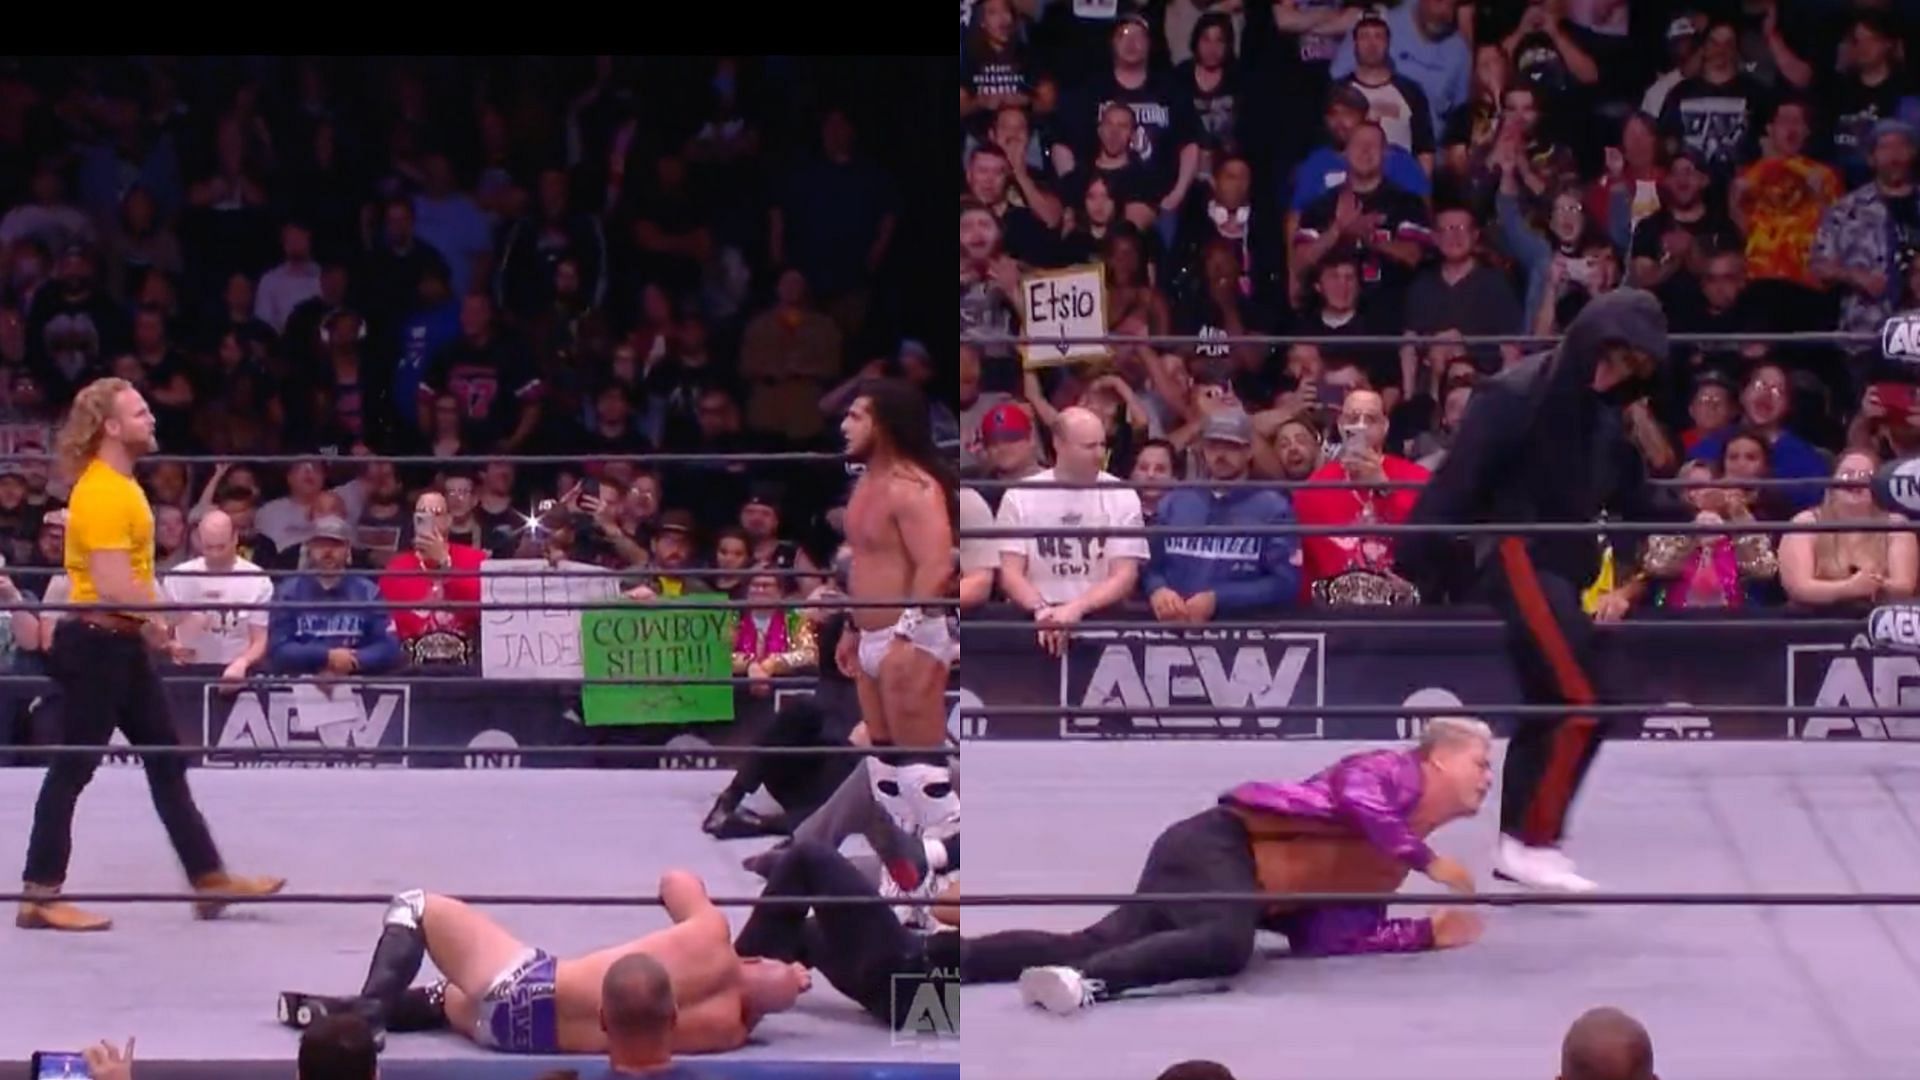 It was an interesting episode of AEW Rampage